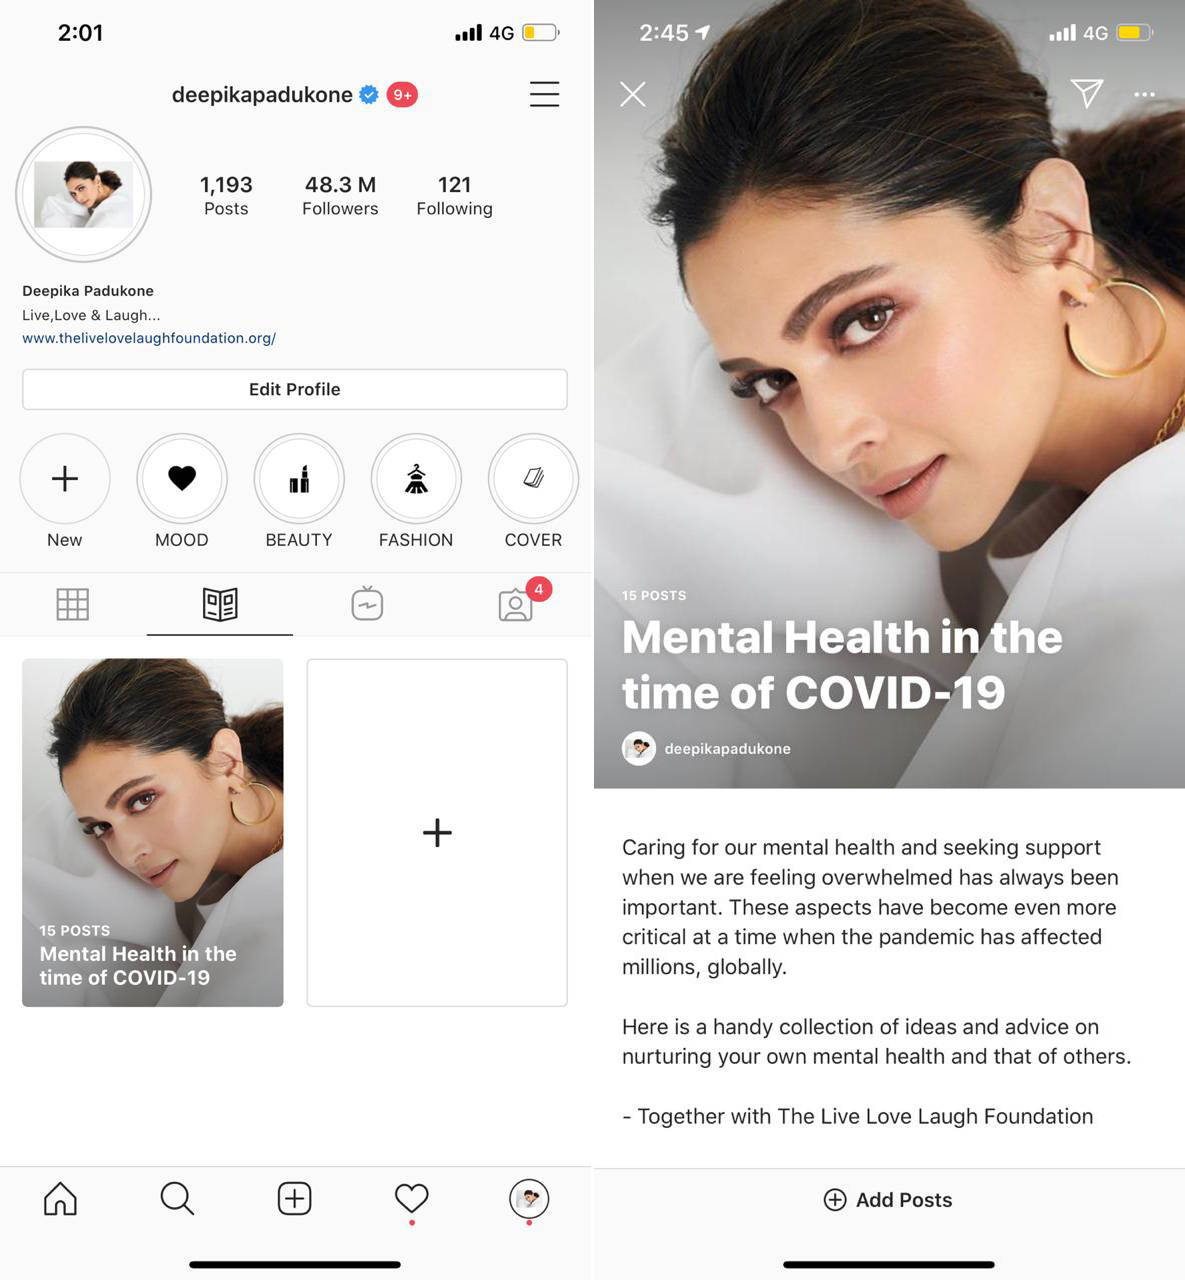 mental health issues: Instagram launches 'Guides', partners with Deepika Padukone to share tips about well-being & mental health - The Economic Times